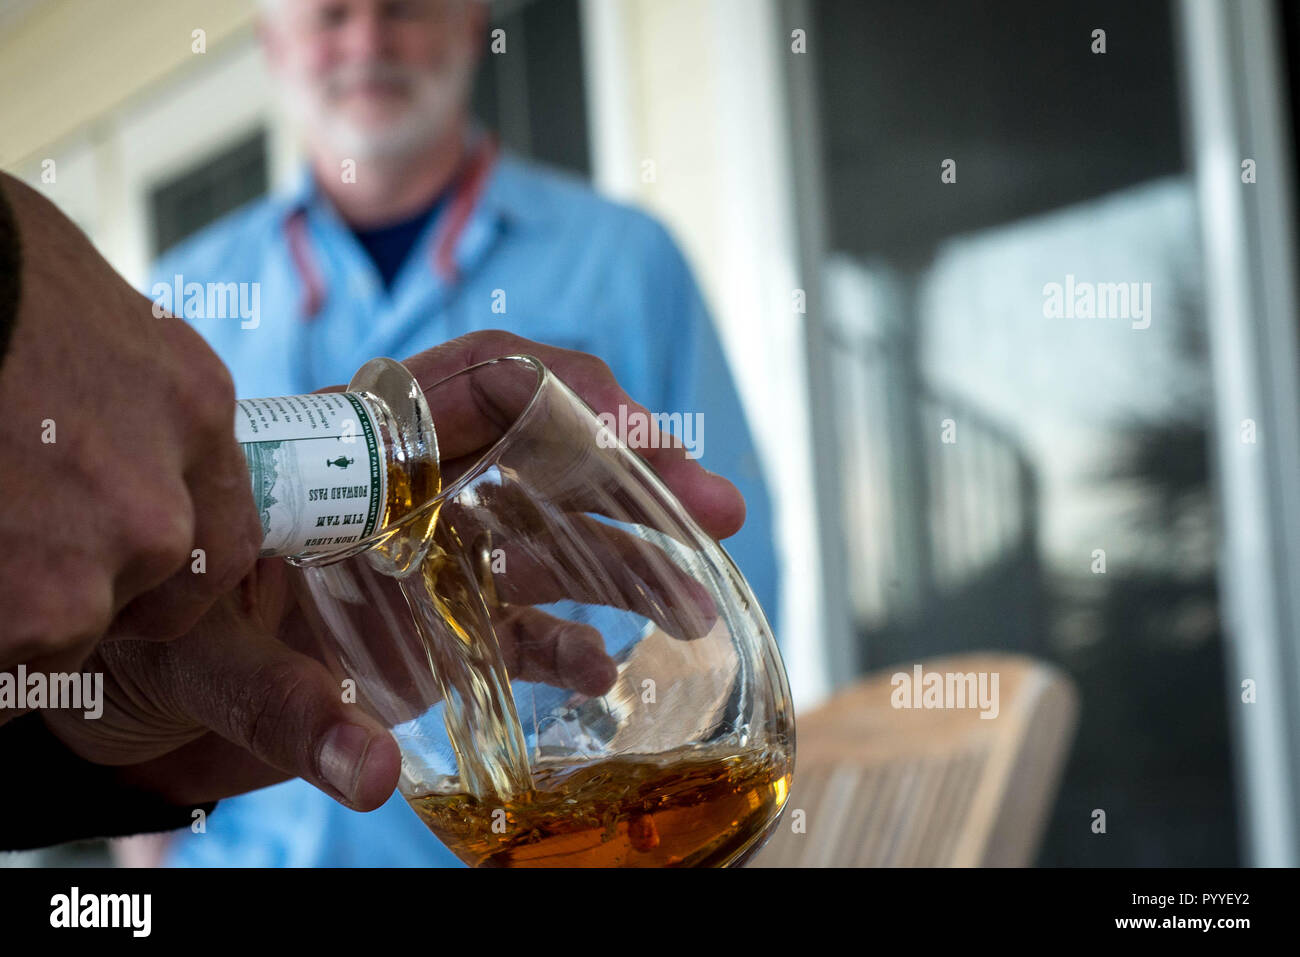 A man shares whisky with friends. Stock Photo